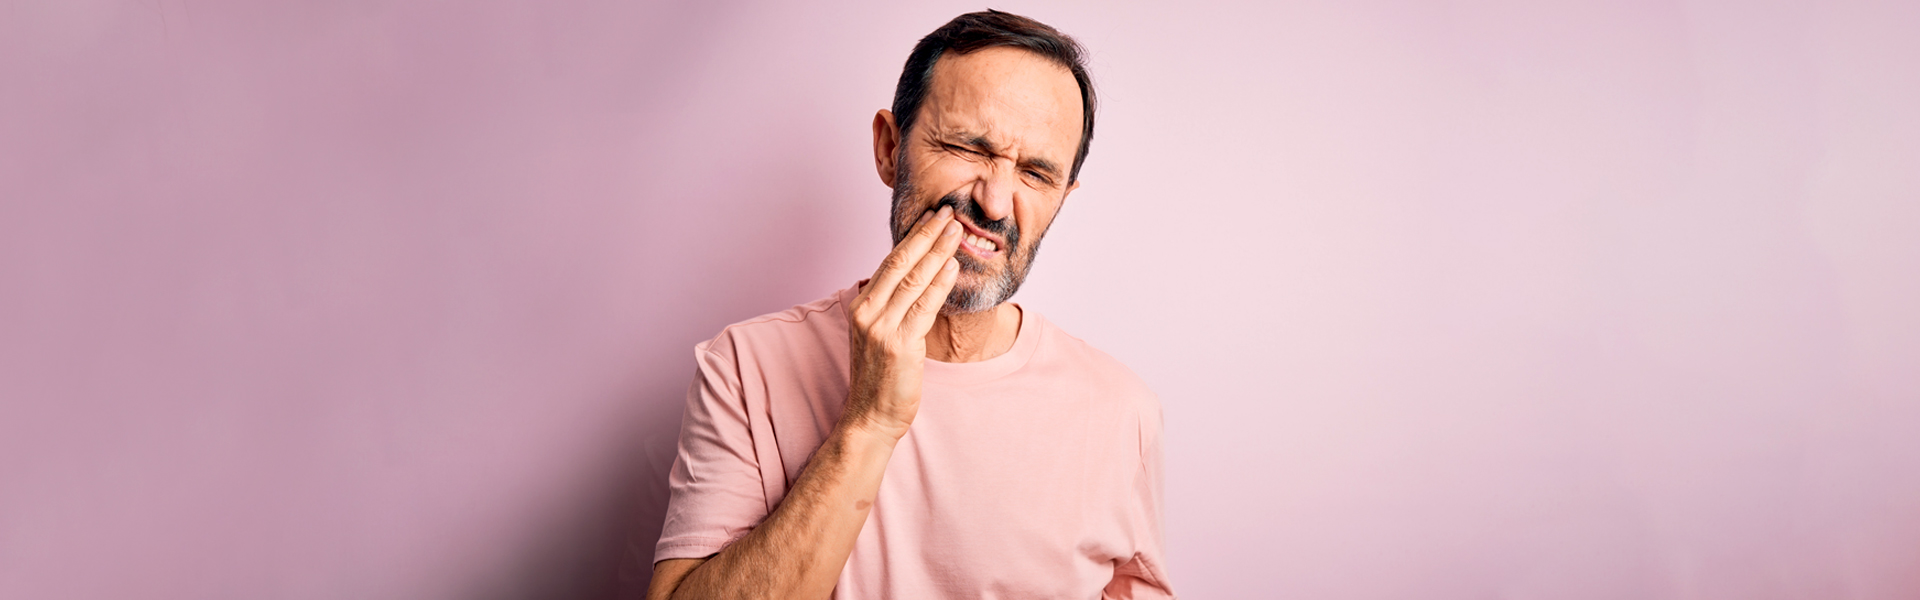 What Should You Do If You Are Faced With a Dental Emergency During COVID19?